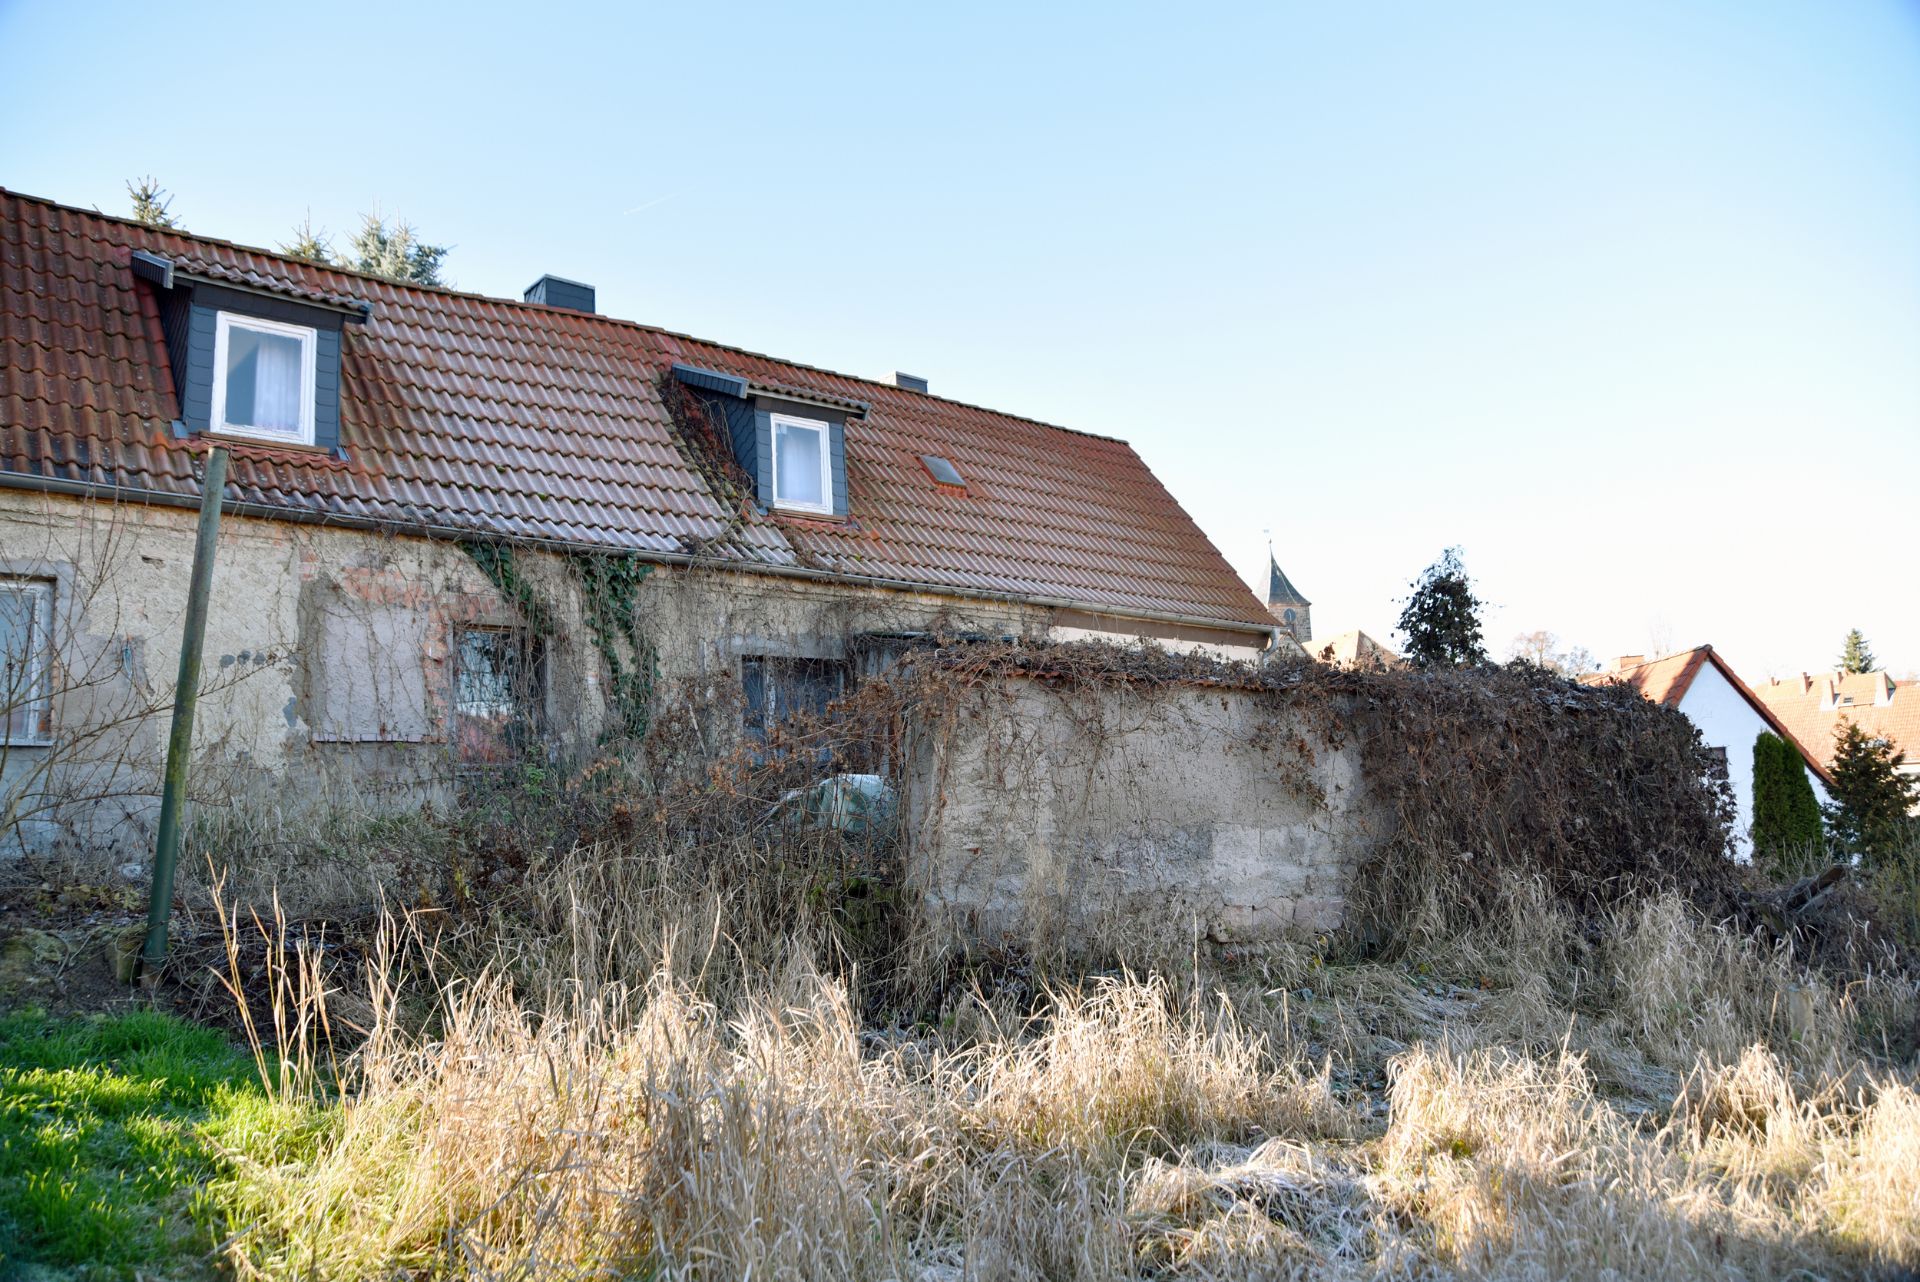 LARGE FREEHOLD HOUSE AND LAND IN SAXONY-ANHALT, GERMANY - Image 9 of 60